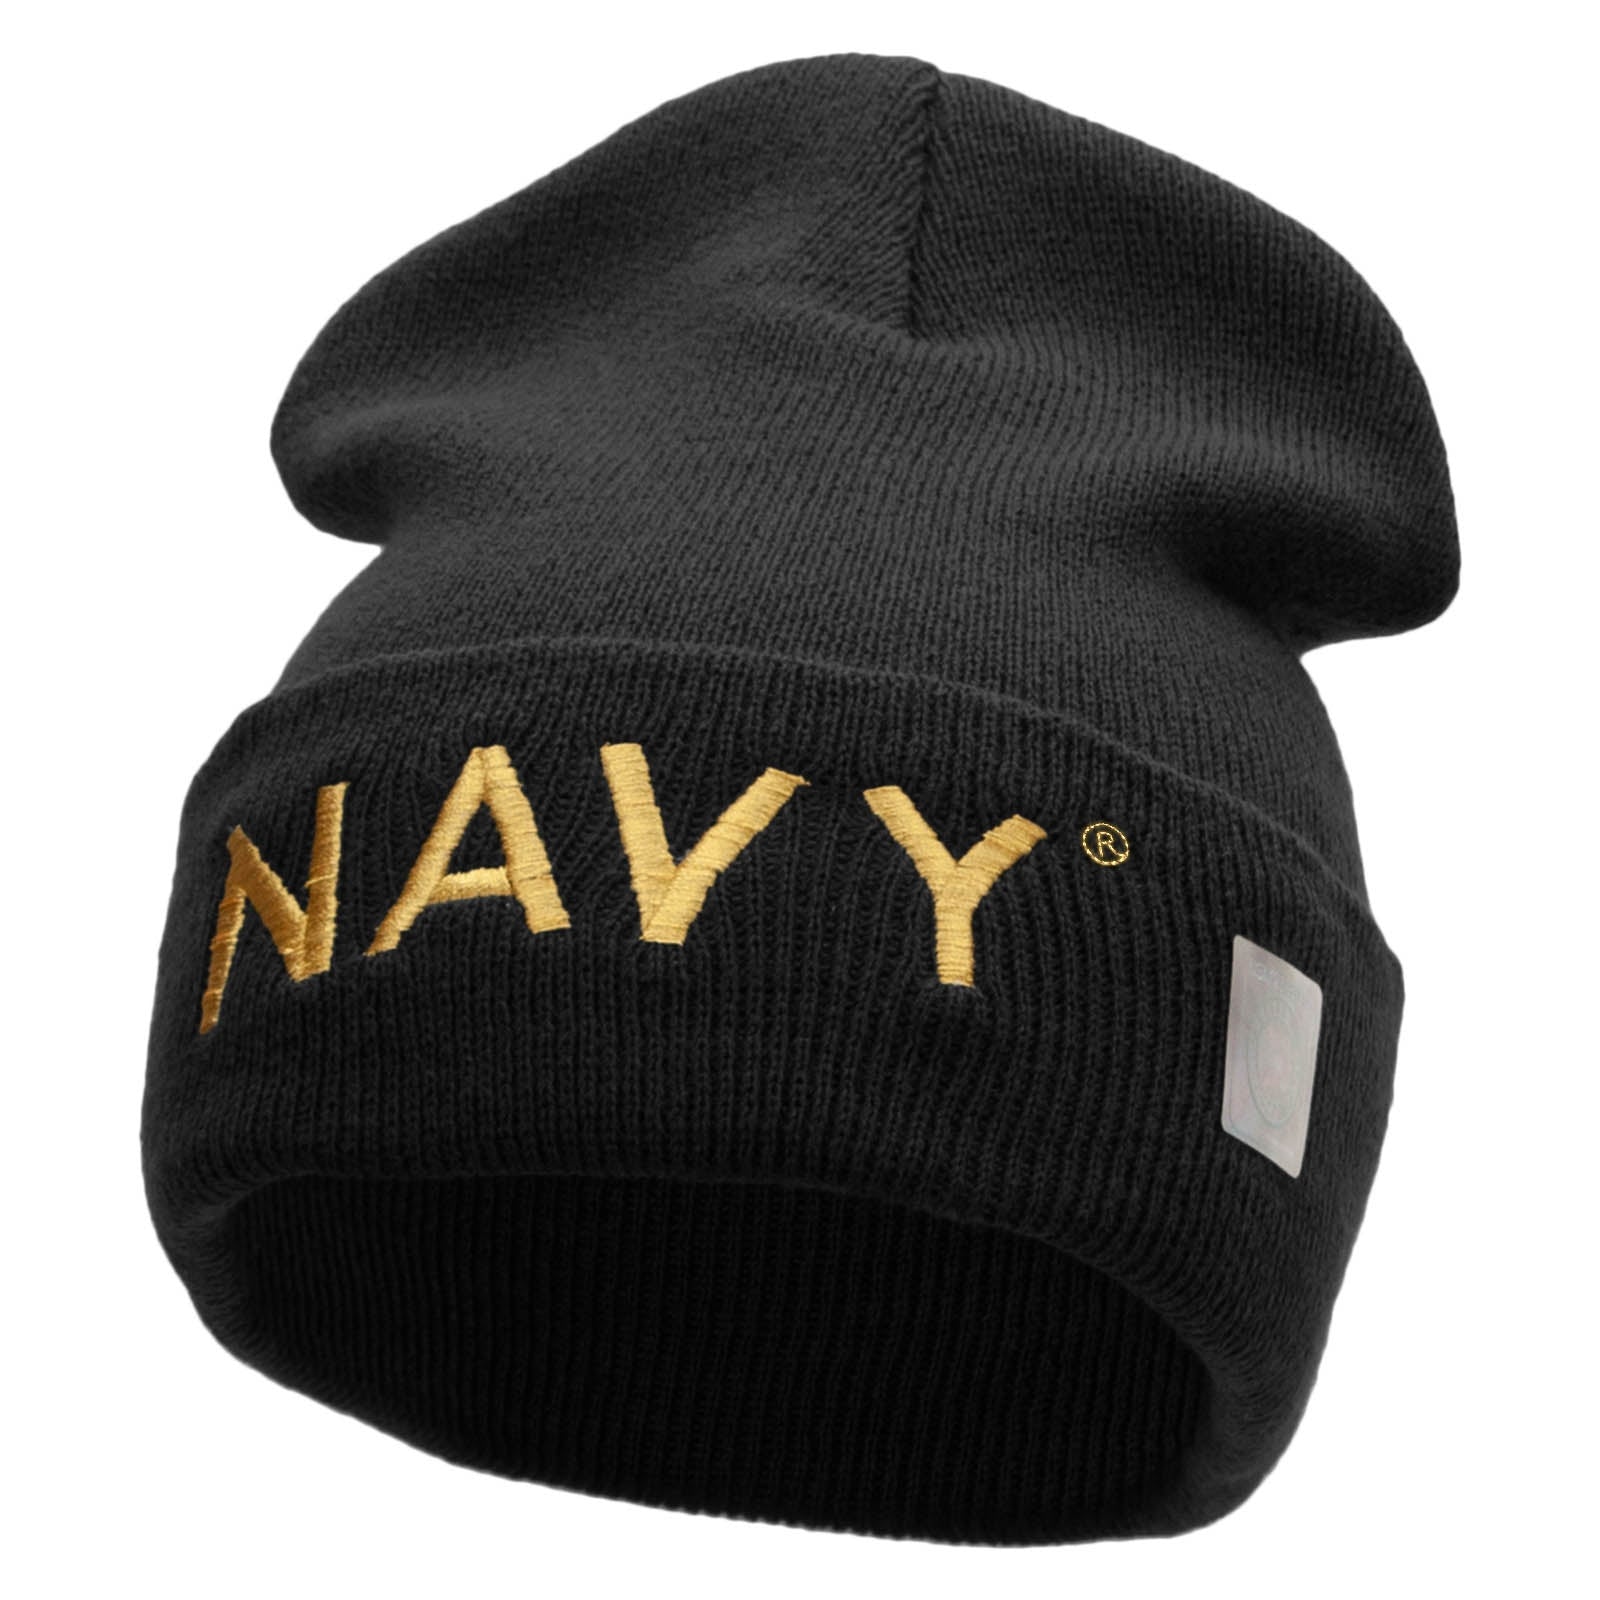 Licensed Navy Embroidered Long Knitted Beanie Made in USA - Black OSFM